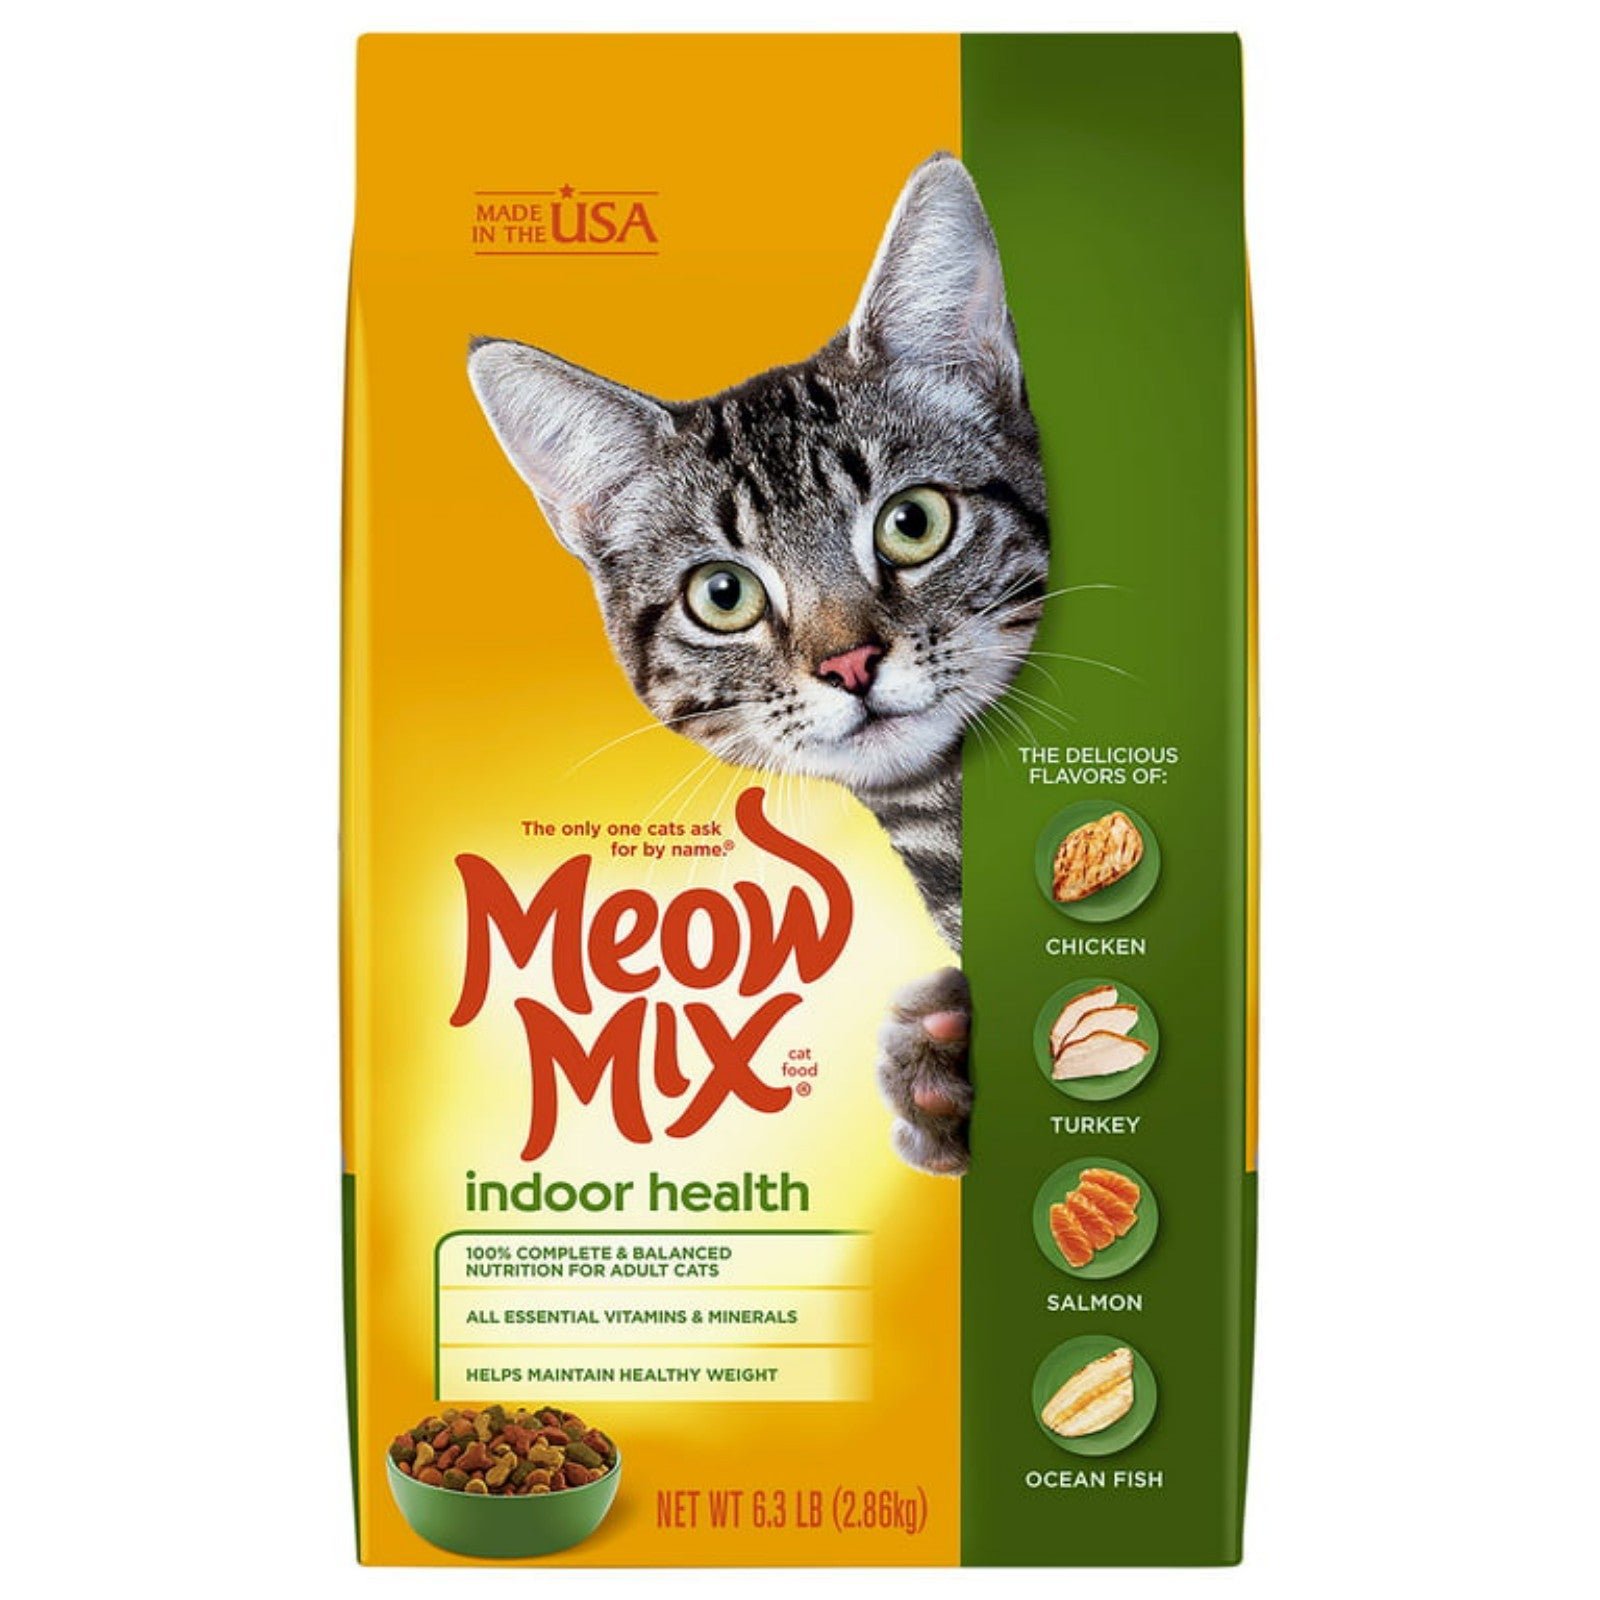 Meow Mix Indoor Health Dry Cat Food, 6.3-Pound Bag E4MQ